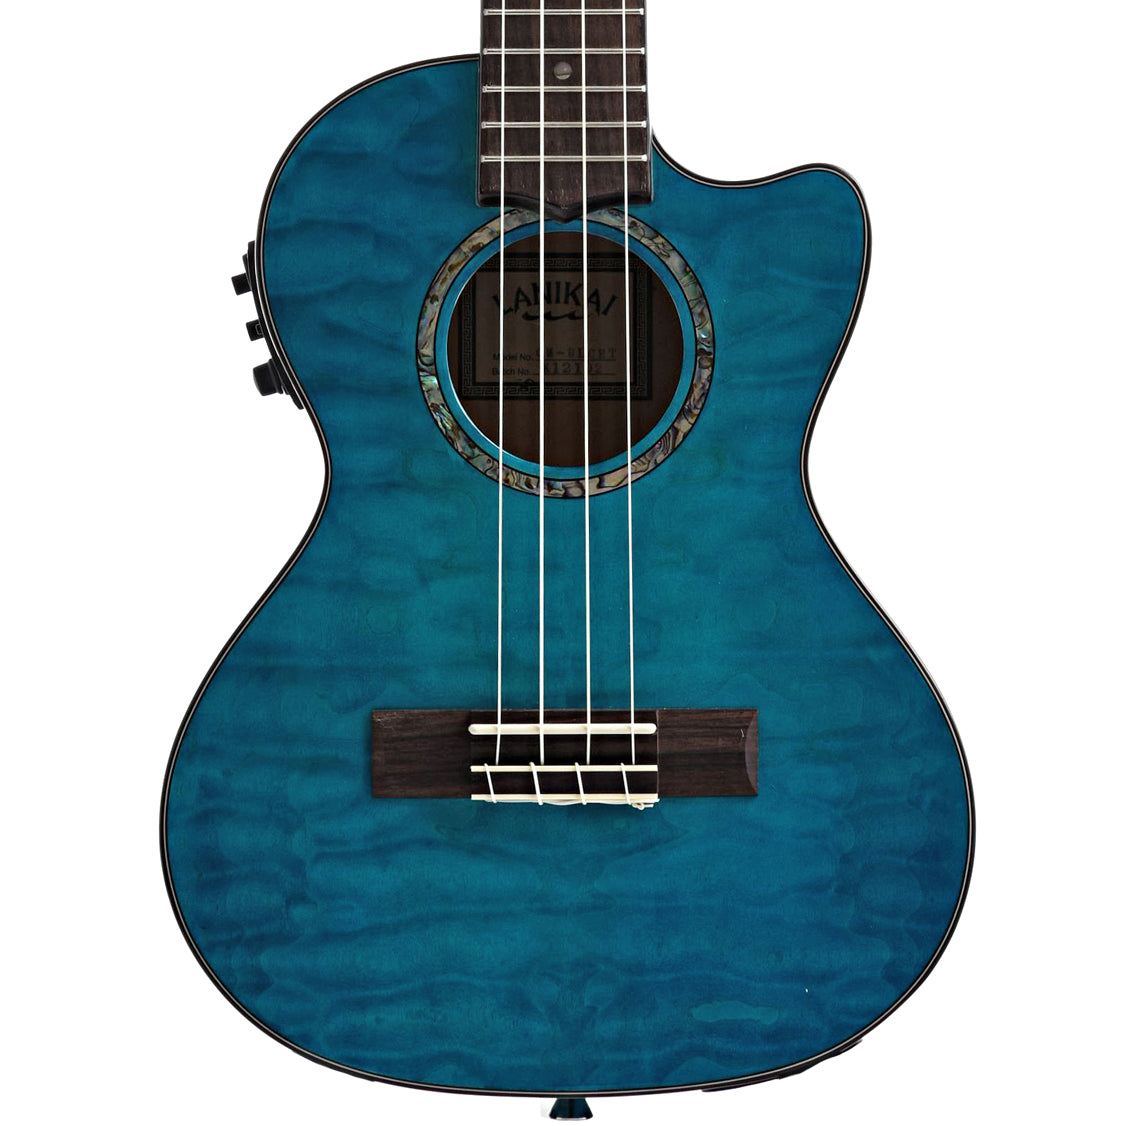 Font of Lanikai Quilted Maple Blue Stain A/E Tenor Ukulele